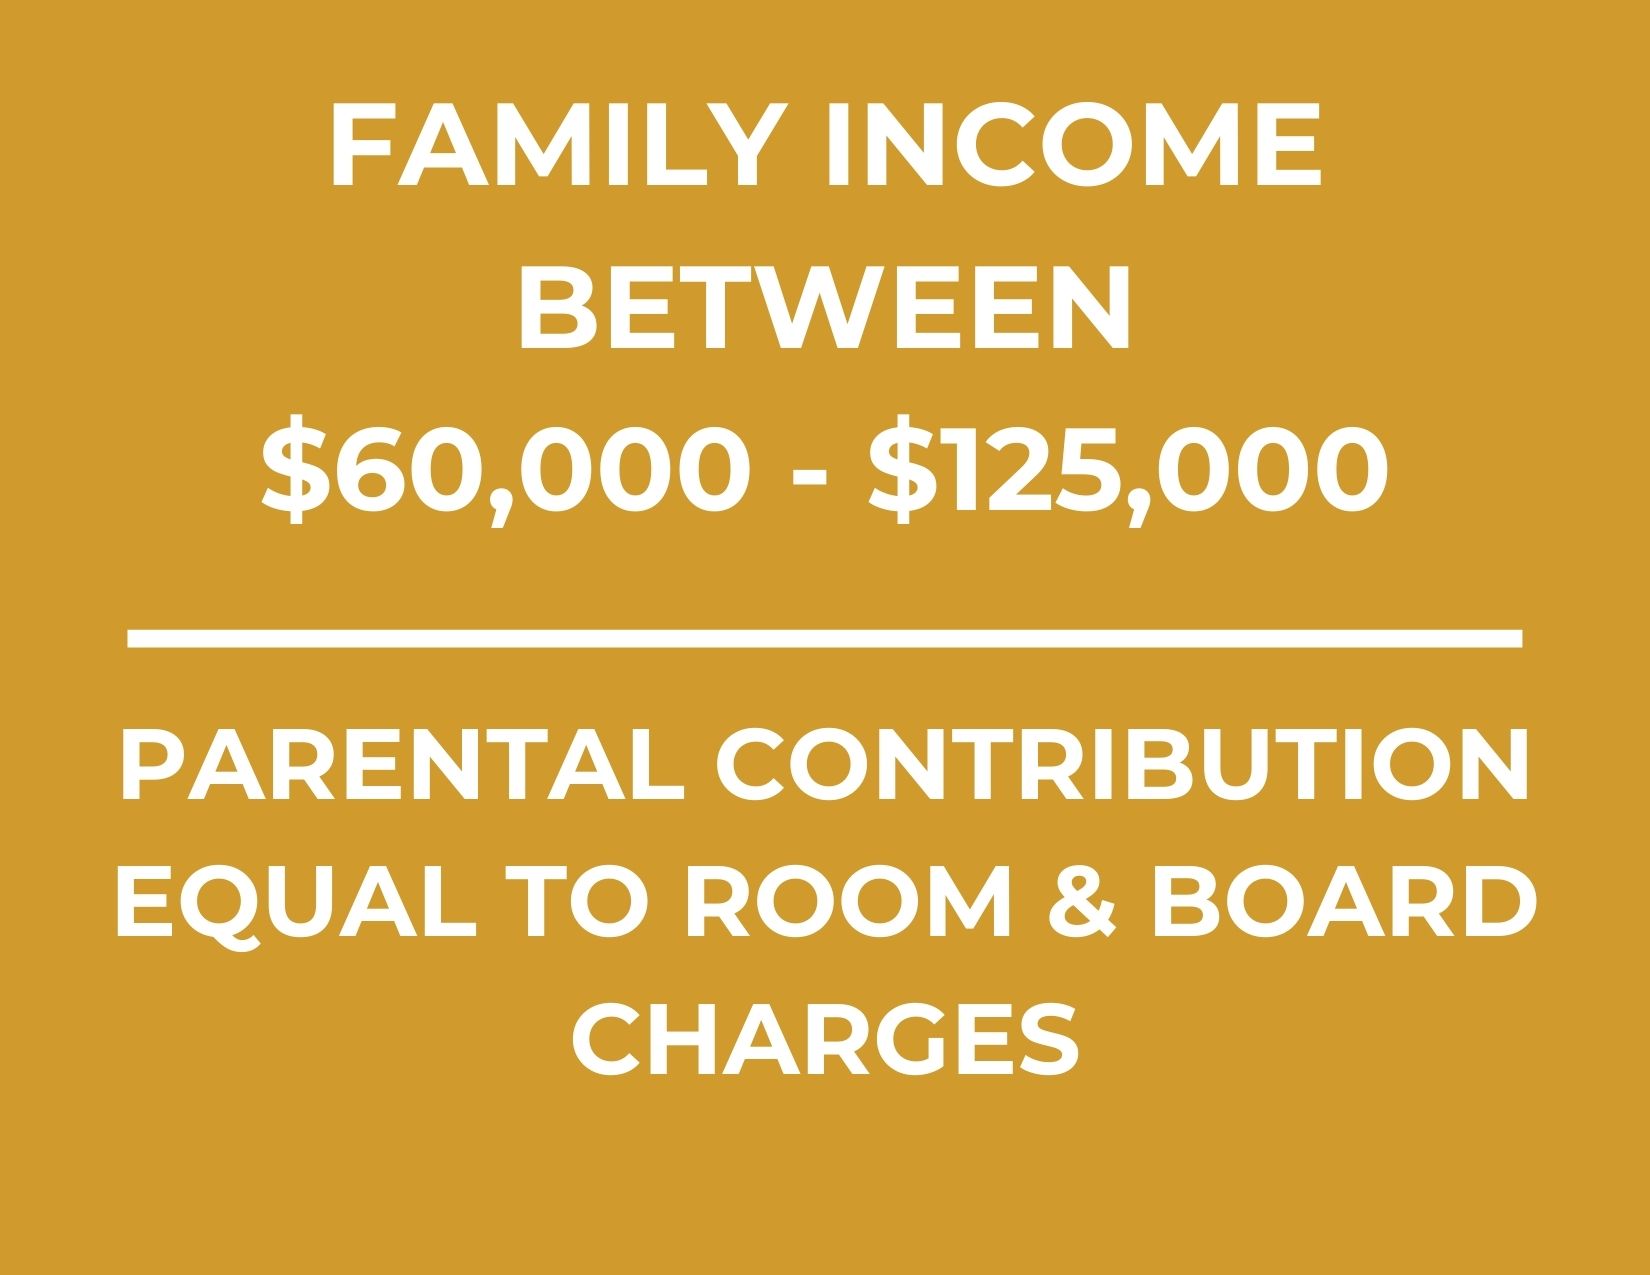 FAMILY INCOME BETWEEN 60000 - 125000